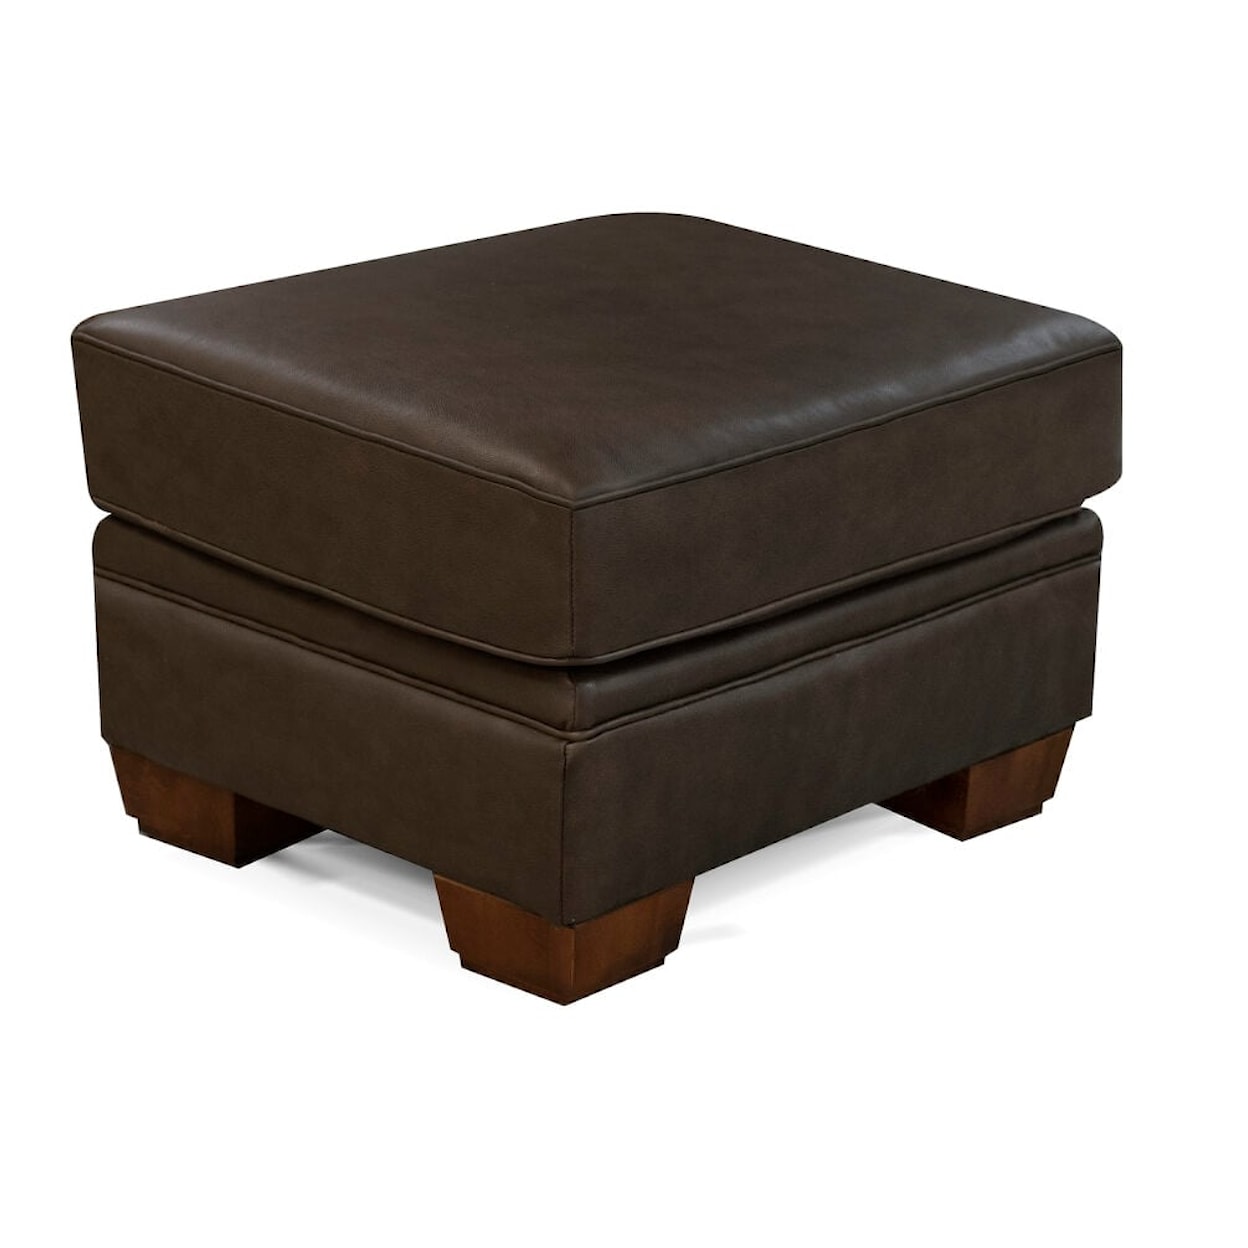 England 1430R/LSR Series Leather Ottoman